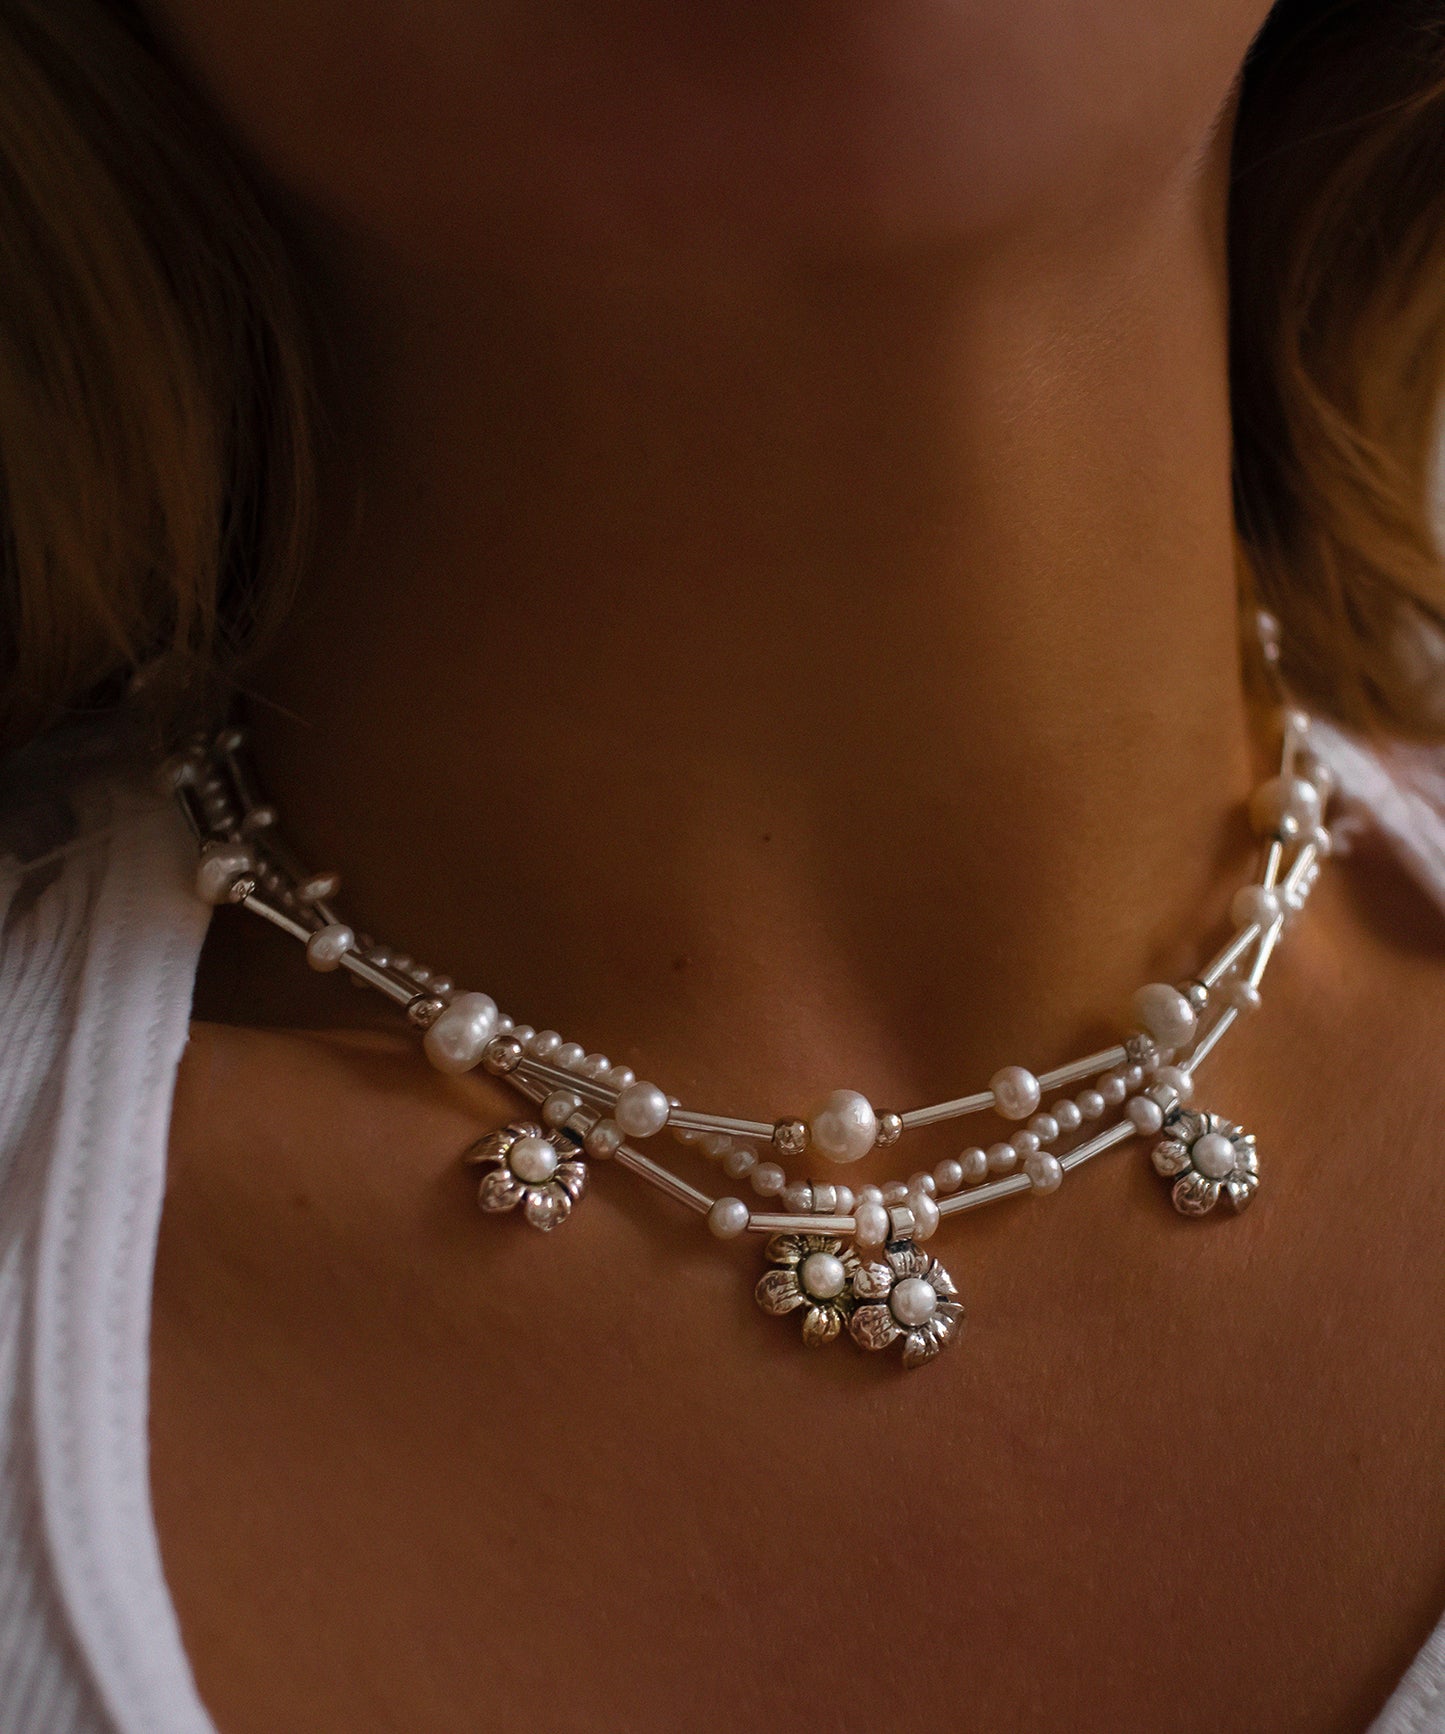 Daisies & Pearls Necklace